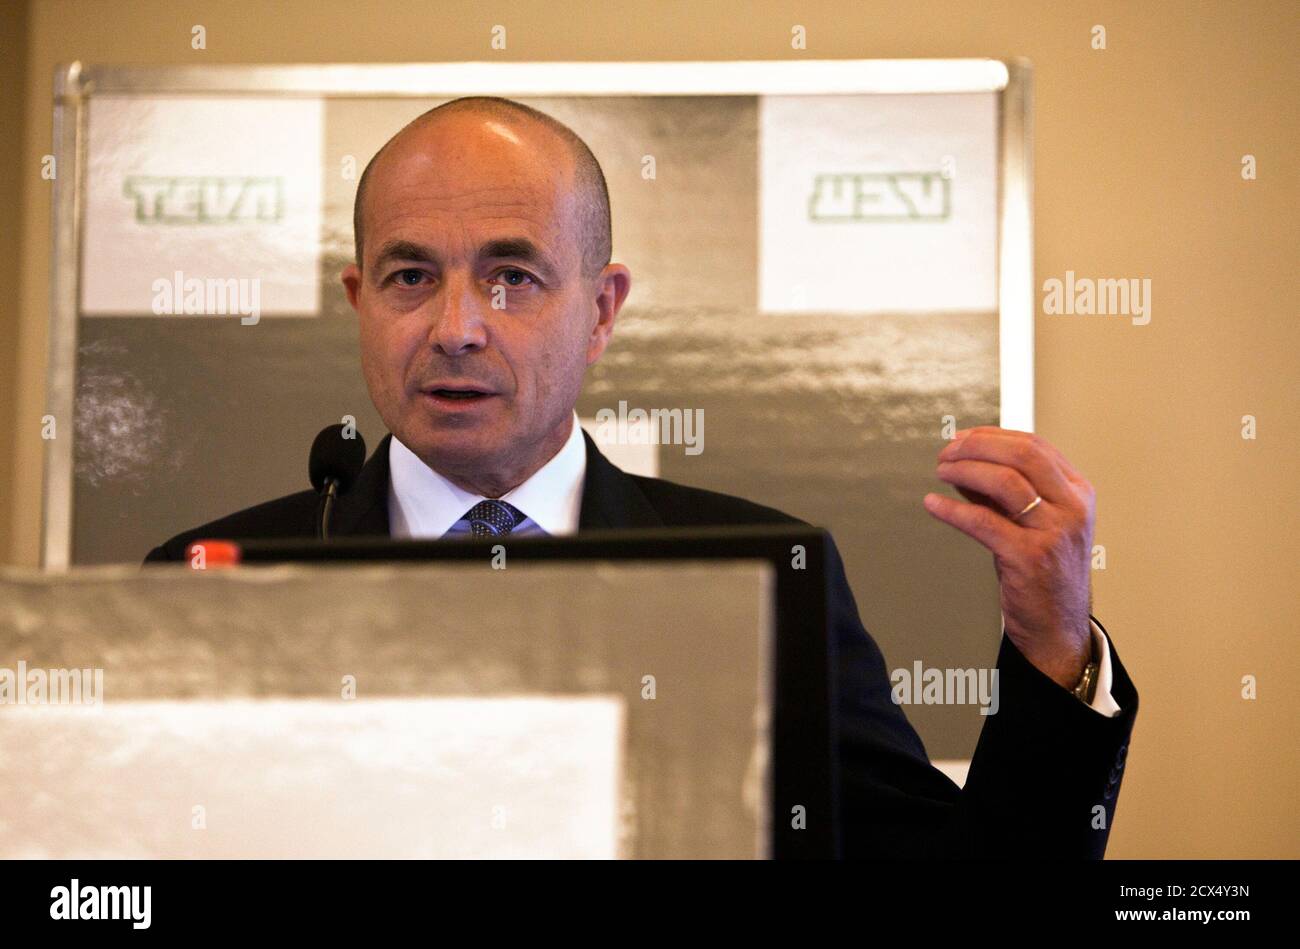 forlade Vanding pouch Teva Pharmaceutical Industries' new CEO Jeremy Levin speaks during a news  conference in Tel Aviv May 9, 2012. Teva Pharmaceutical Industries posted a  40 percent jump in quarterly profit that beat estimates,